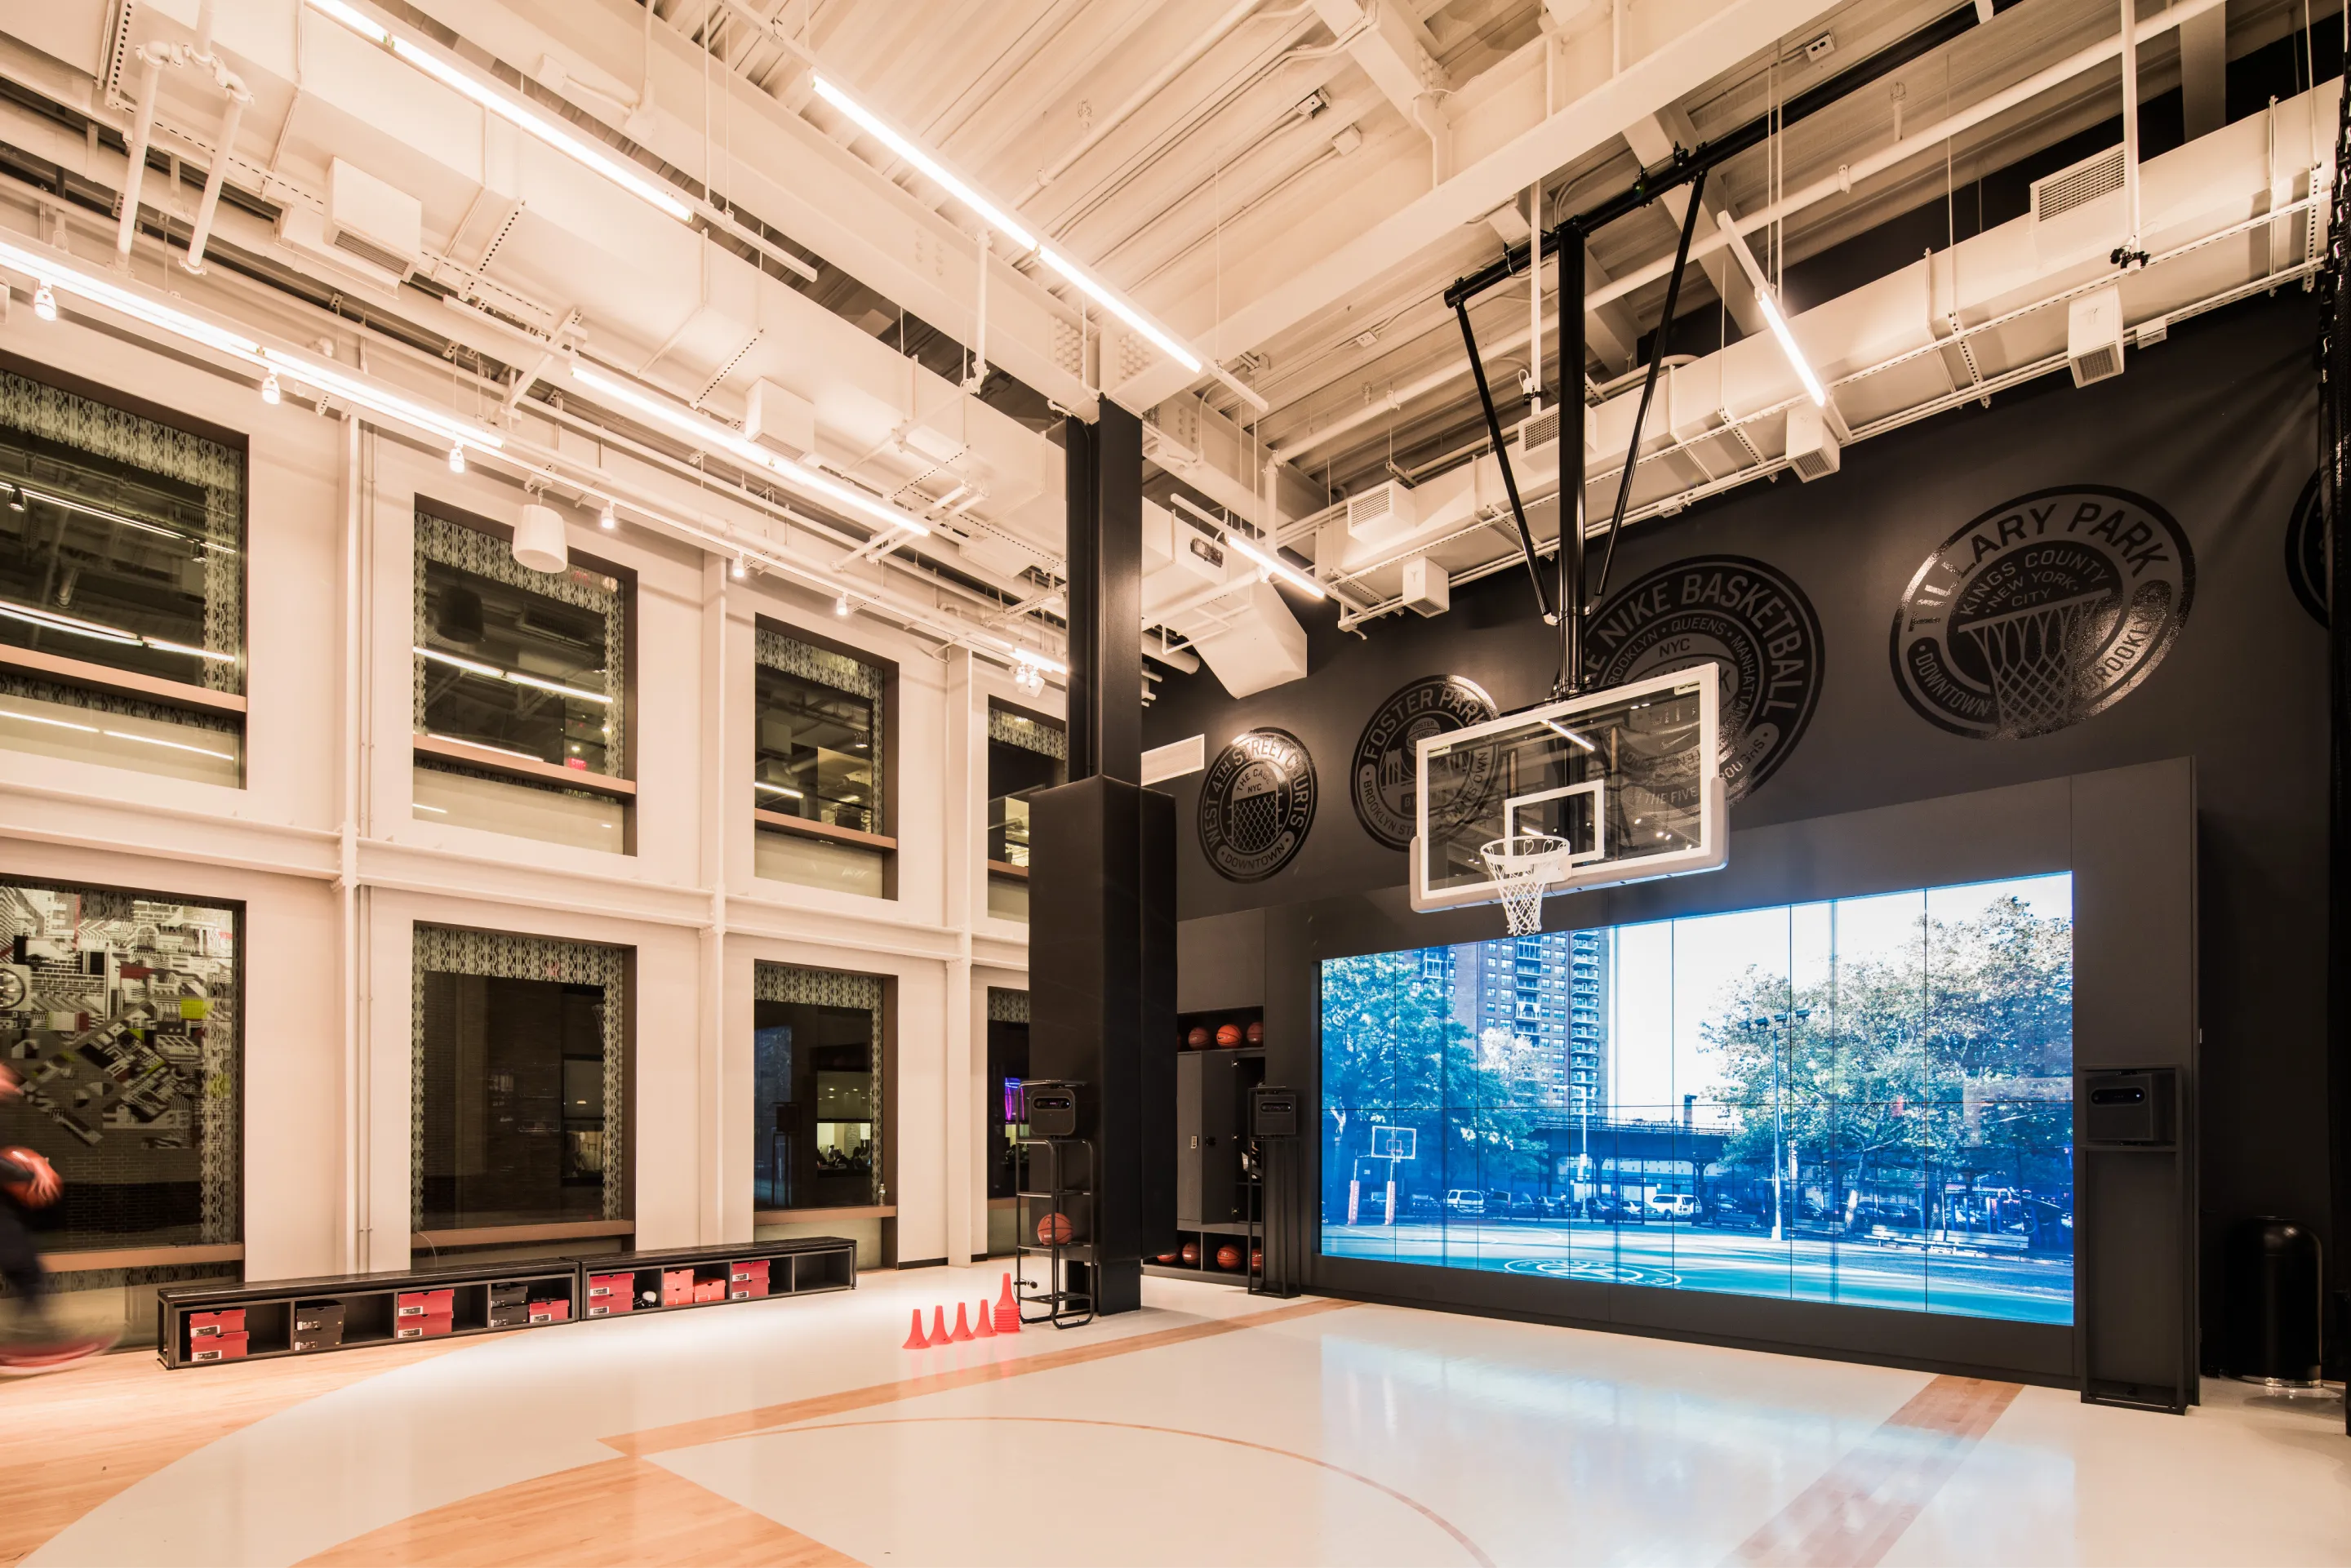 Immersive Interactive Trial Zone Experience in the Nike Flagship Soho Store with wall-sized screen and basketball court